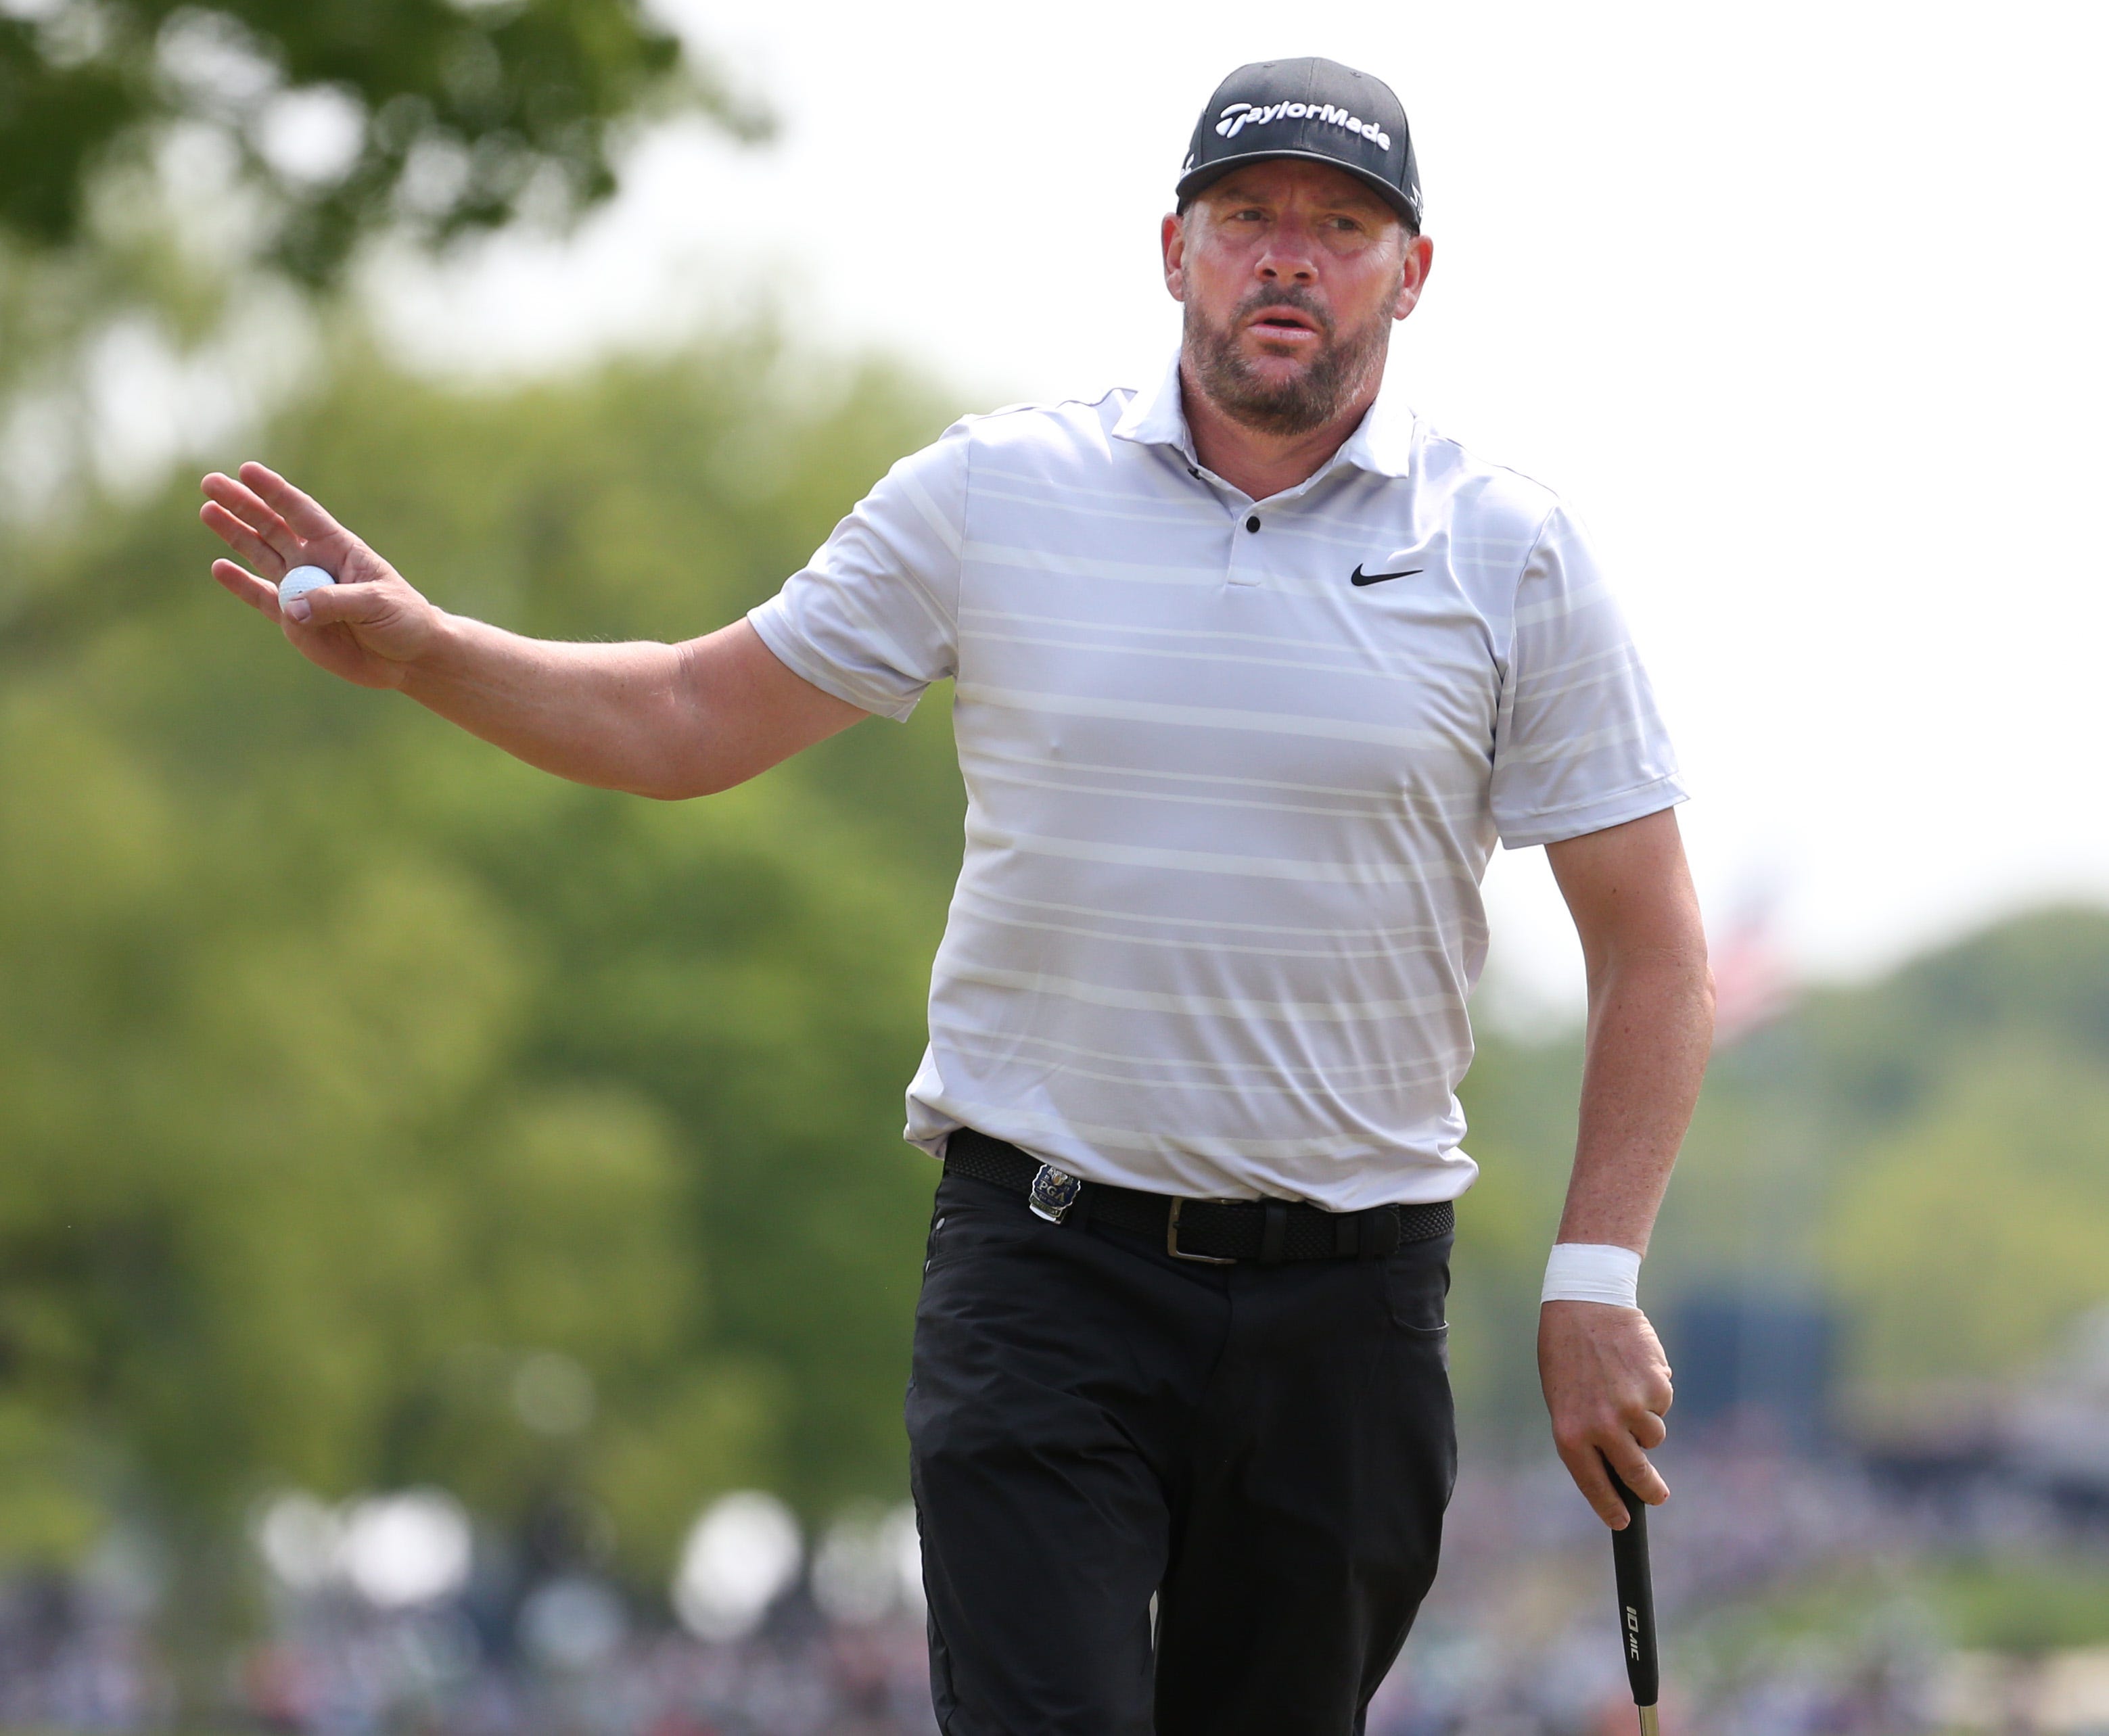 Michael Block waves to fans after his par putt on the 4th hole during the final round at the PGA Championship at Oak Hill Country Club Sunday, May 21, 2023.